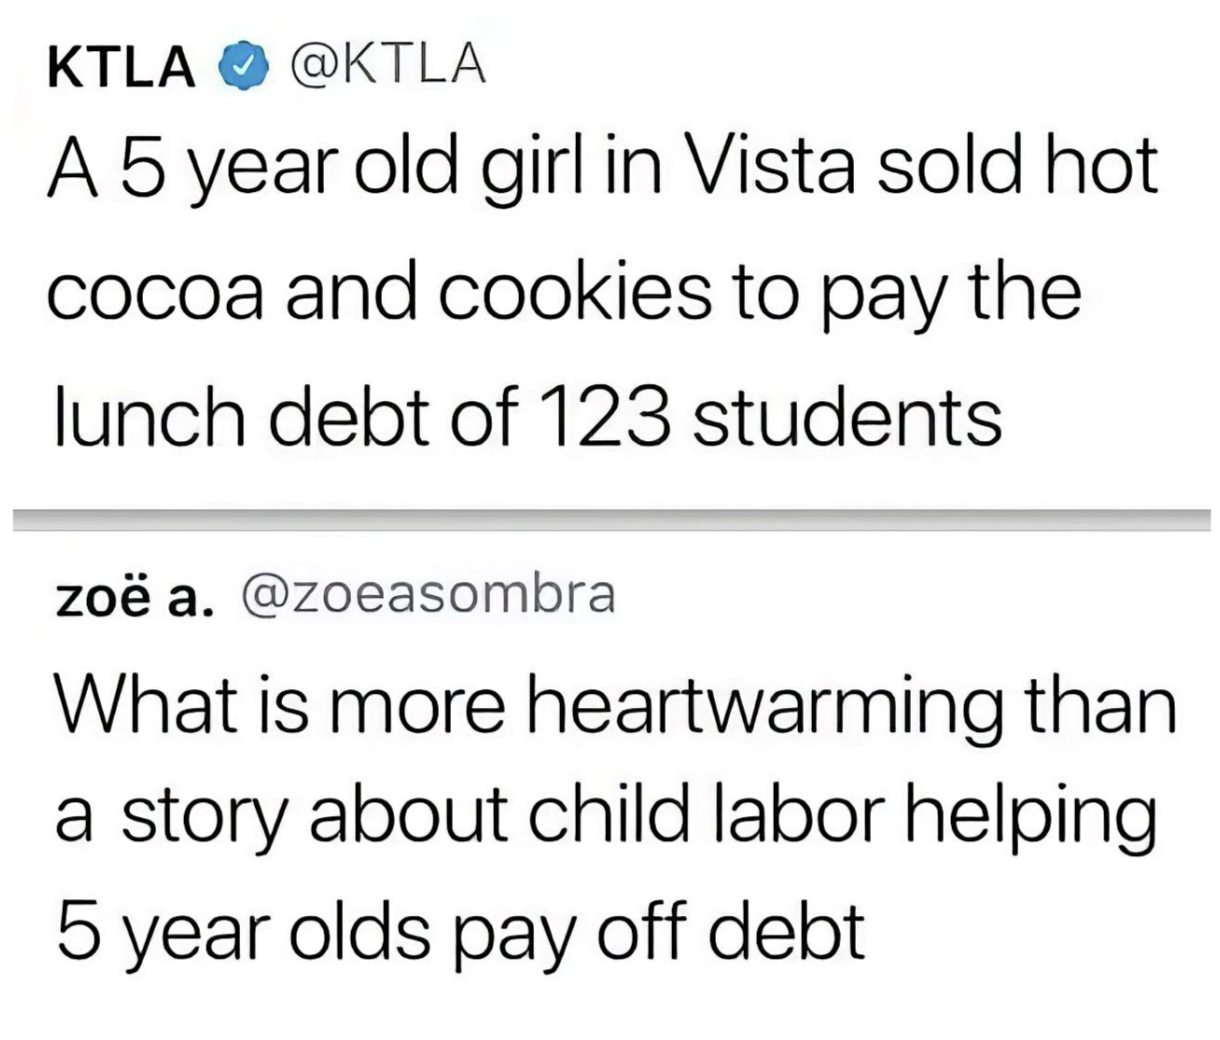 number - Ktla A 5 year old girl in Vista sold hot cocoa and cookies to pay the lunch debt of 123 students zo a. What is more heartwarming than a story about child labor helping 5 year olds pay off debt